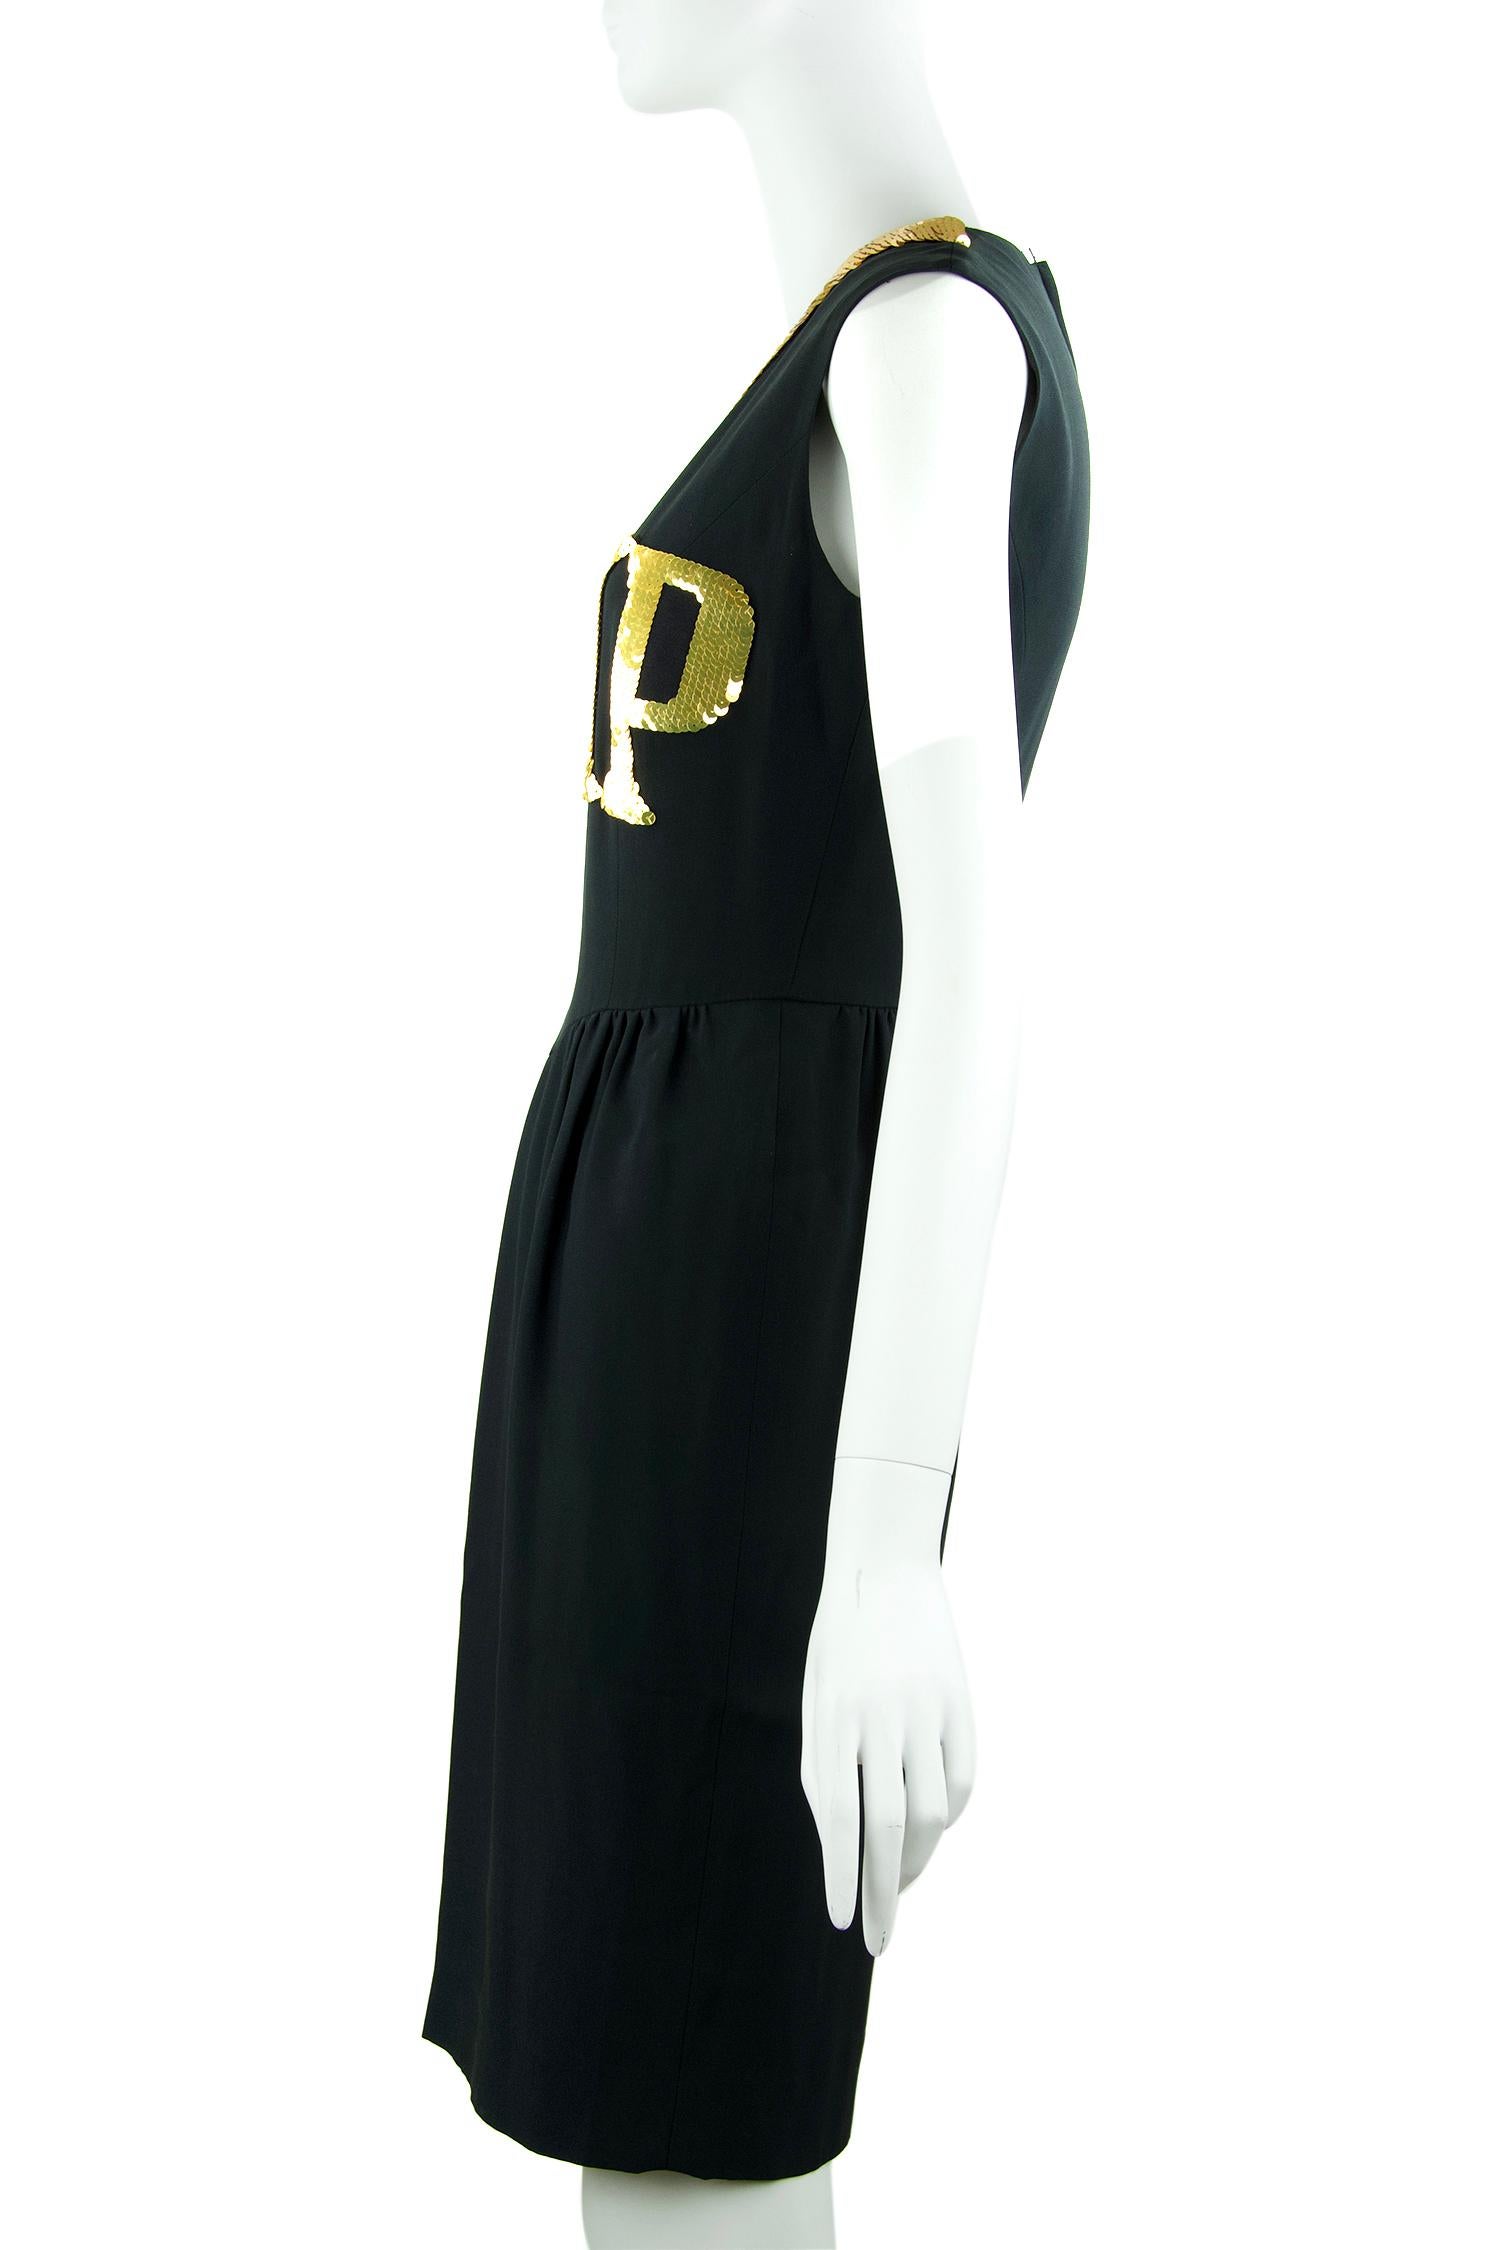 Iconic Moschino black sleeveless dress with gold sequin VIP detail.  Features a v neck and center back zipper.  

Size: XS

Condition: Pristine

Composition: 55% acetate, 45% rayon / lining 60% acetate, 40% rayon

Made in Italy